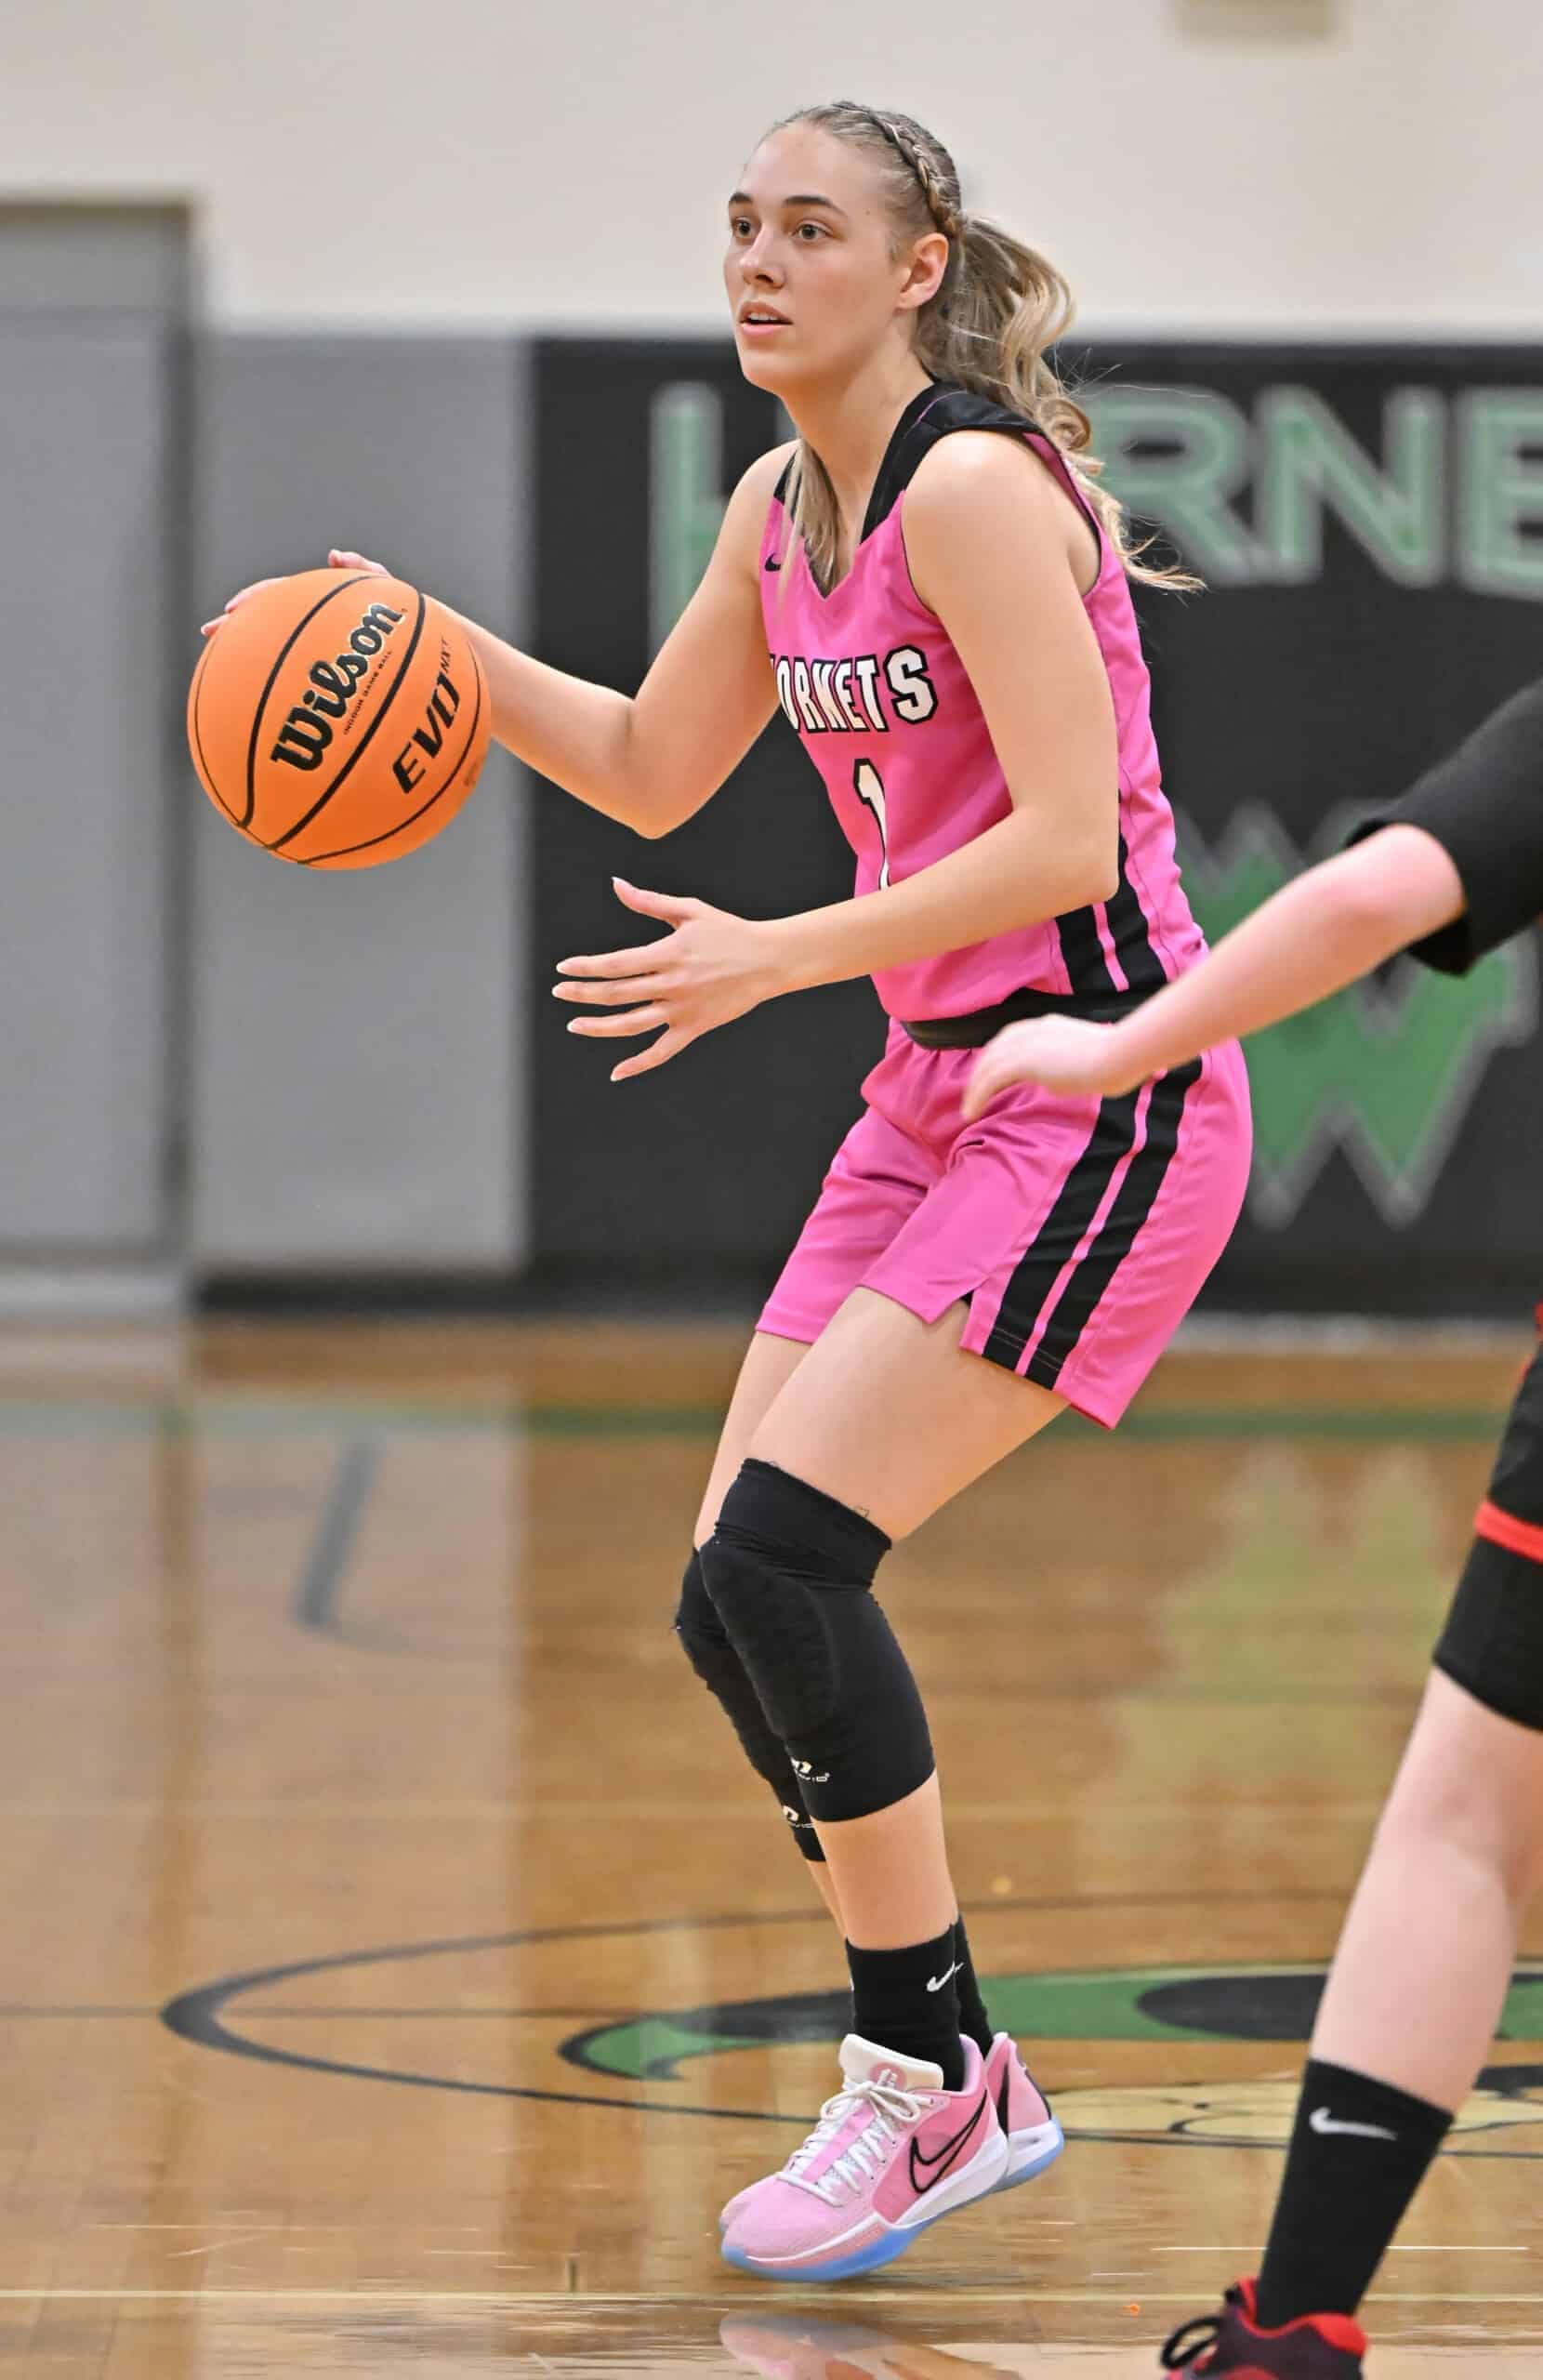 Weeki Wachee's Paige Atwater broke a trio of school records in February during a single game against the Hudson Cobras. [Photo by Daniel Brovont]